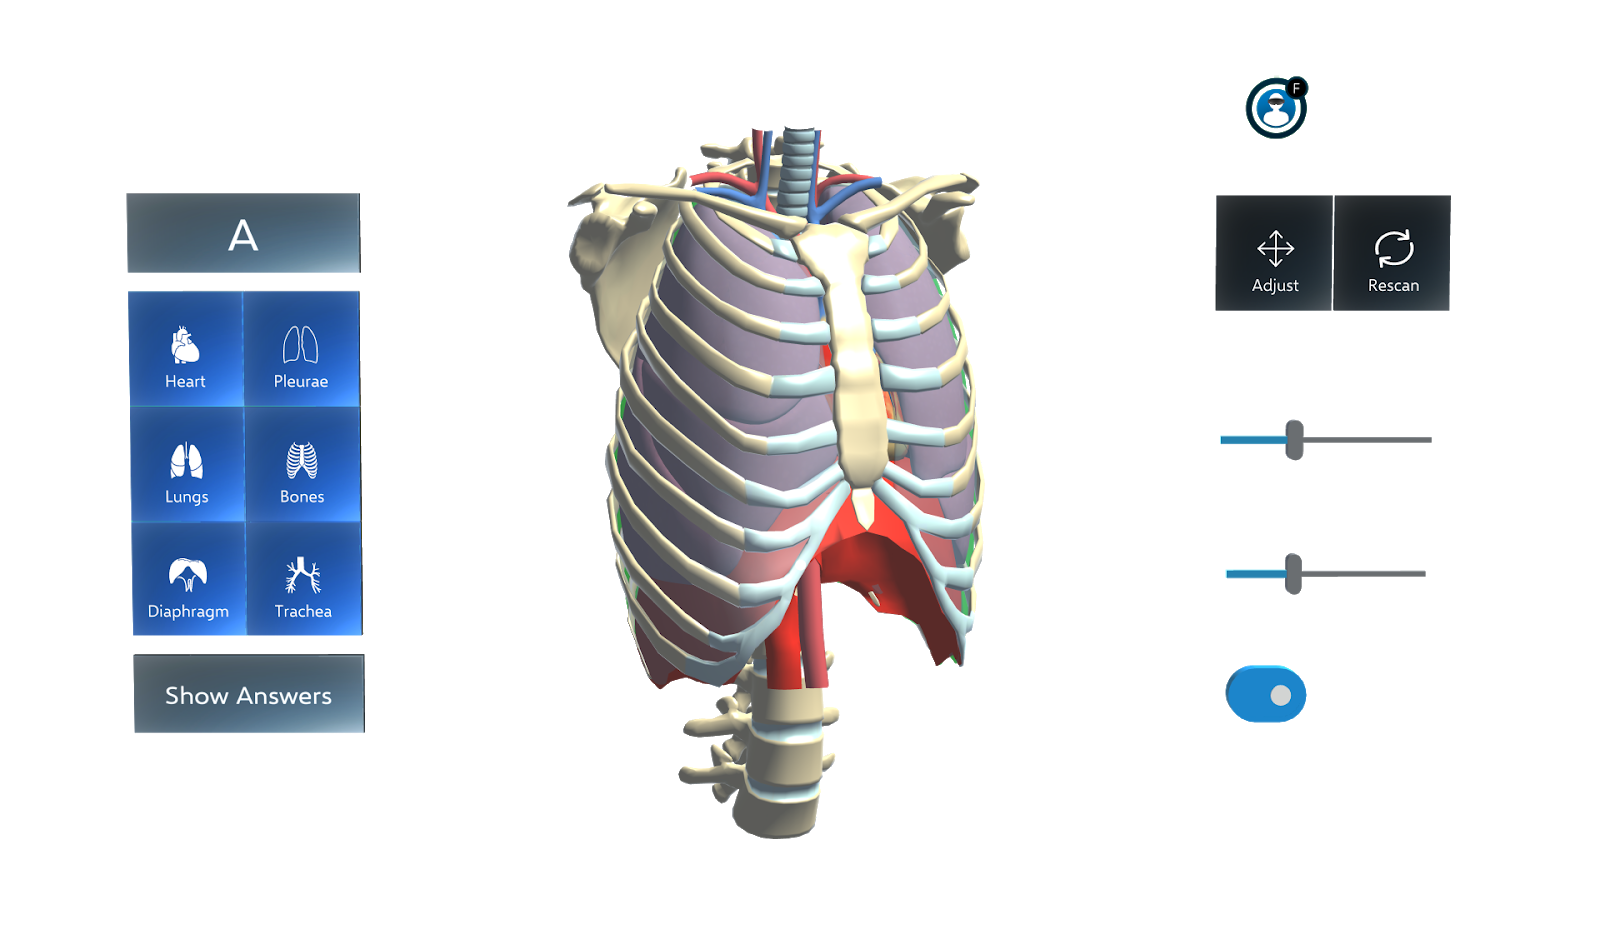 Impression of the Augmedicine, Lung Cases’ visual user interface